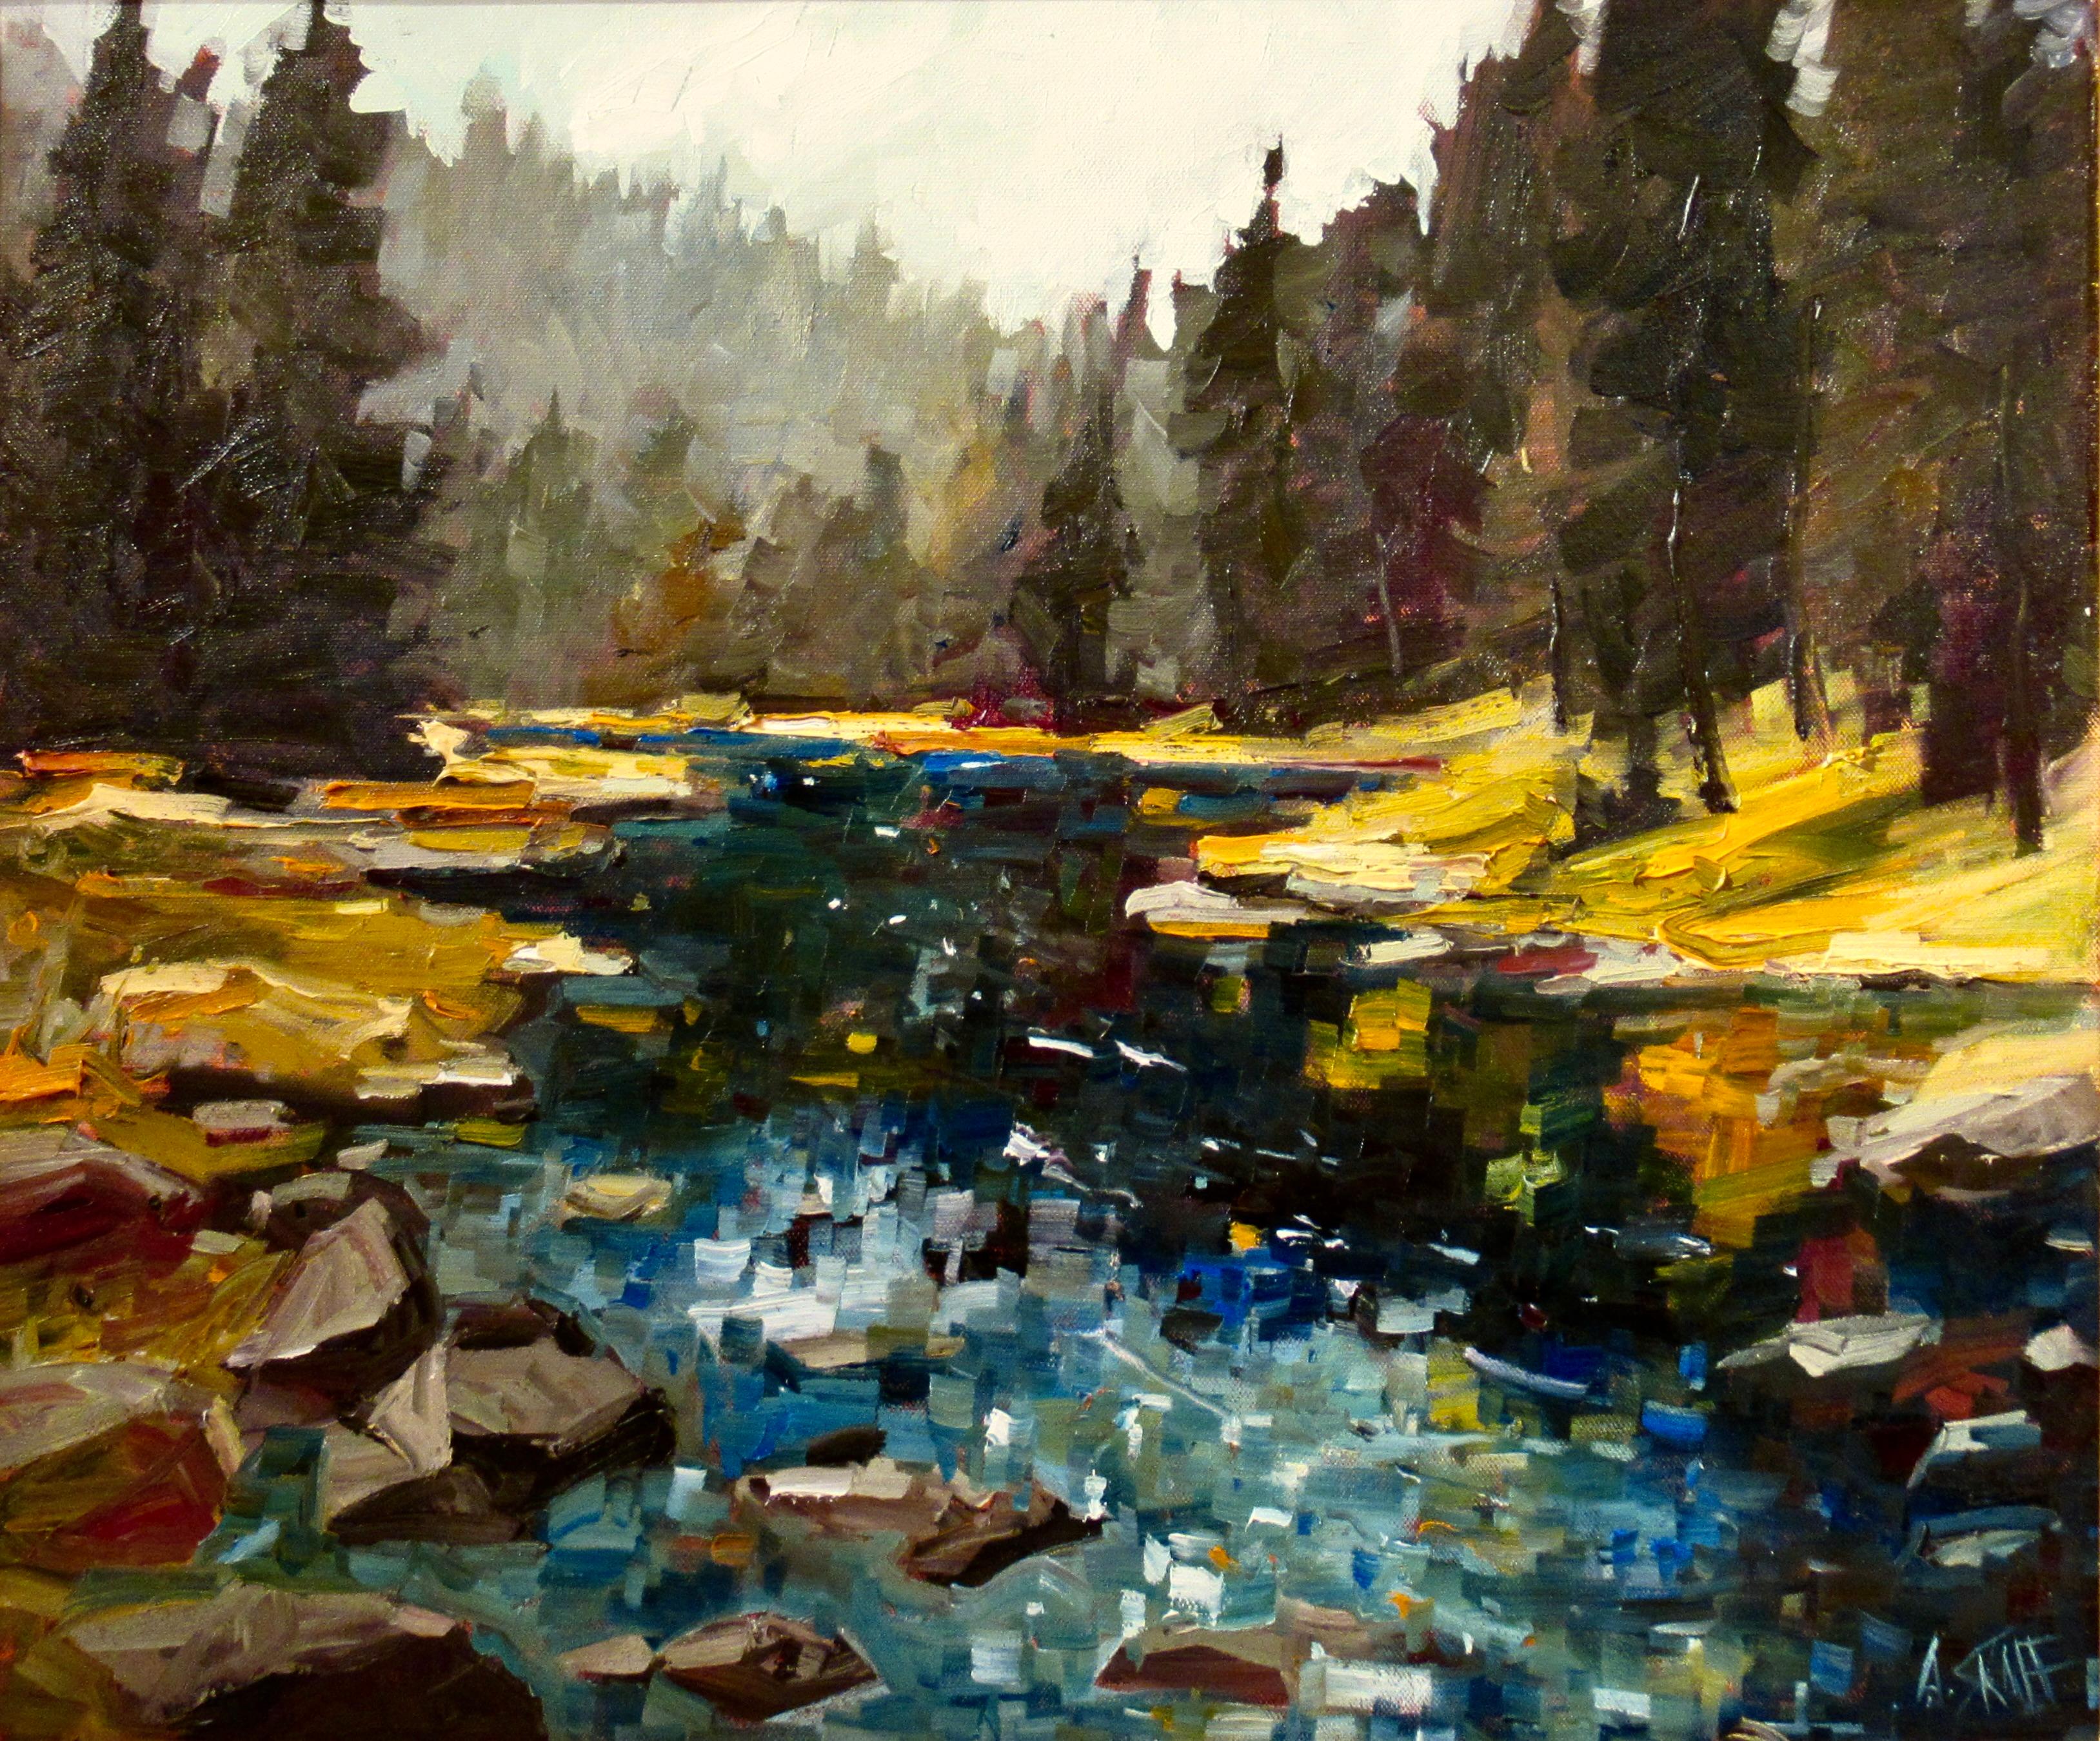 River Colors V (Lake Tahoe) - Painting by Andrew (Andy) Skaff